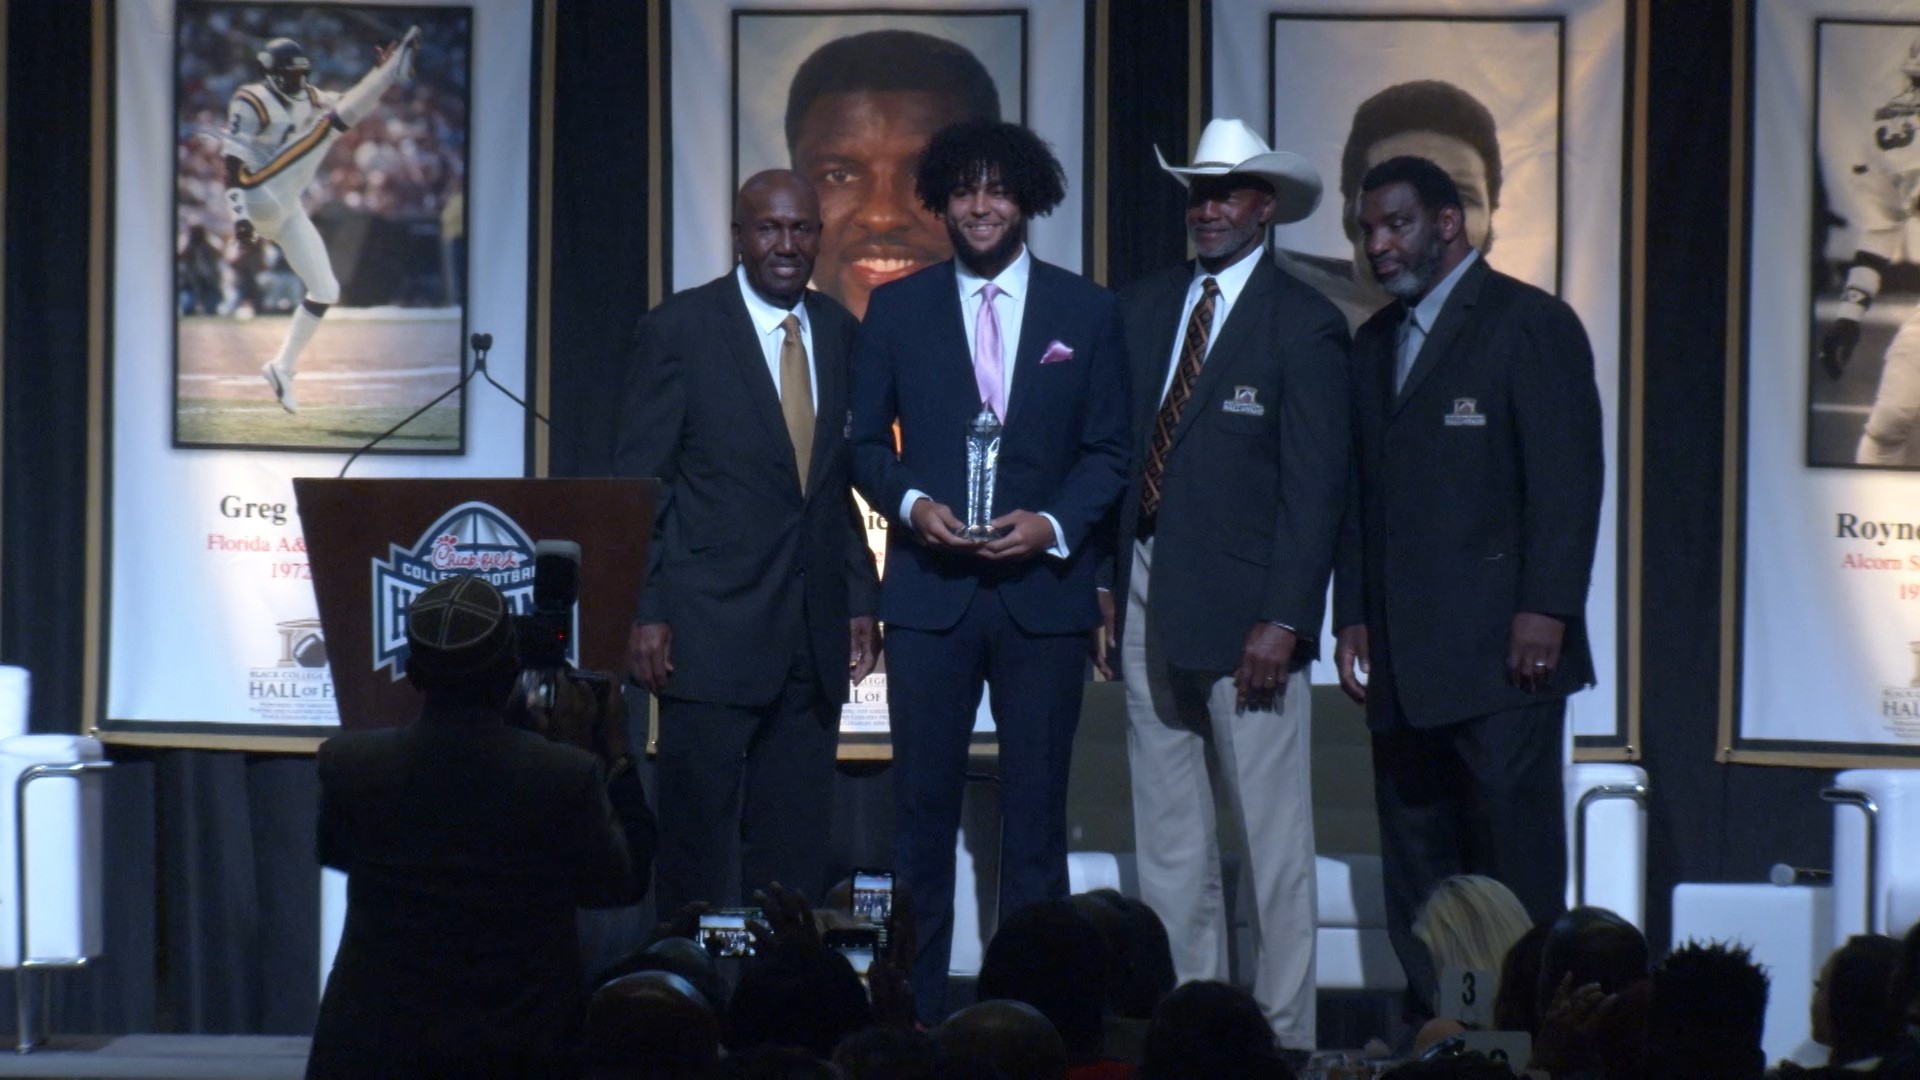 Alabama A&M Head Football Coach Connell Maynor & Sr. quarterback Aqeel Glass were honored with national awards from the Black College Football Hall of Fame Saturday